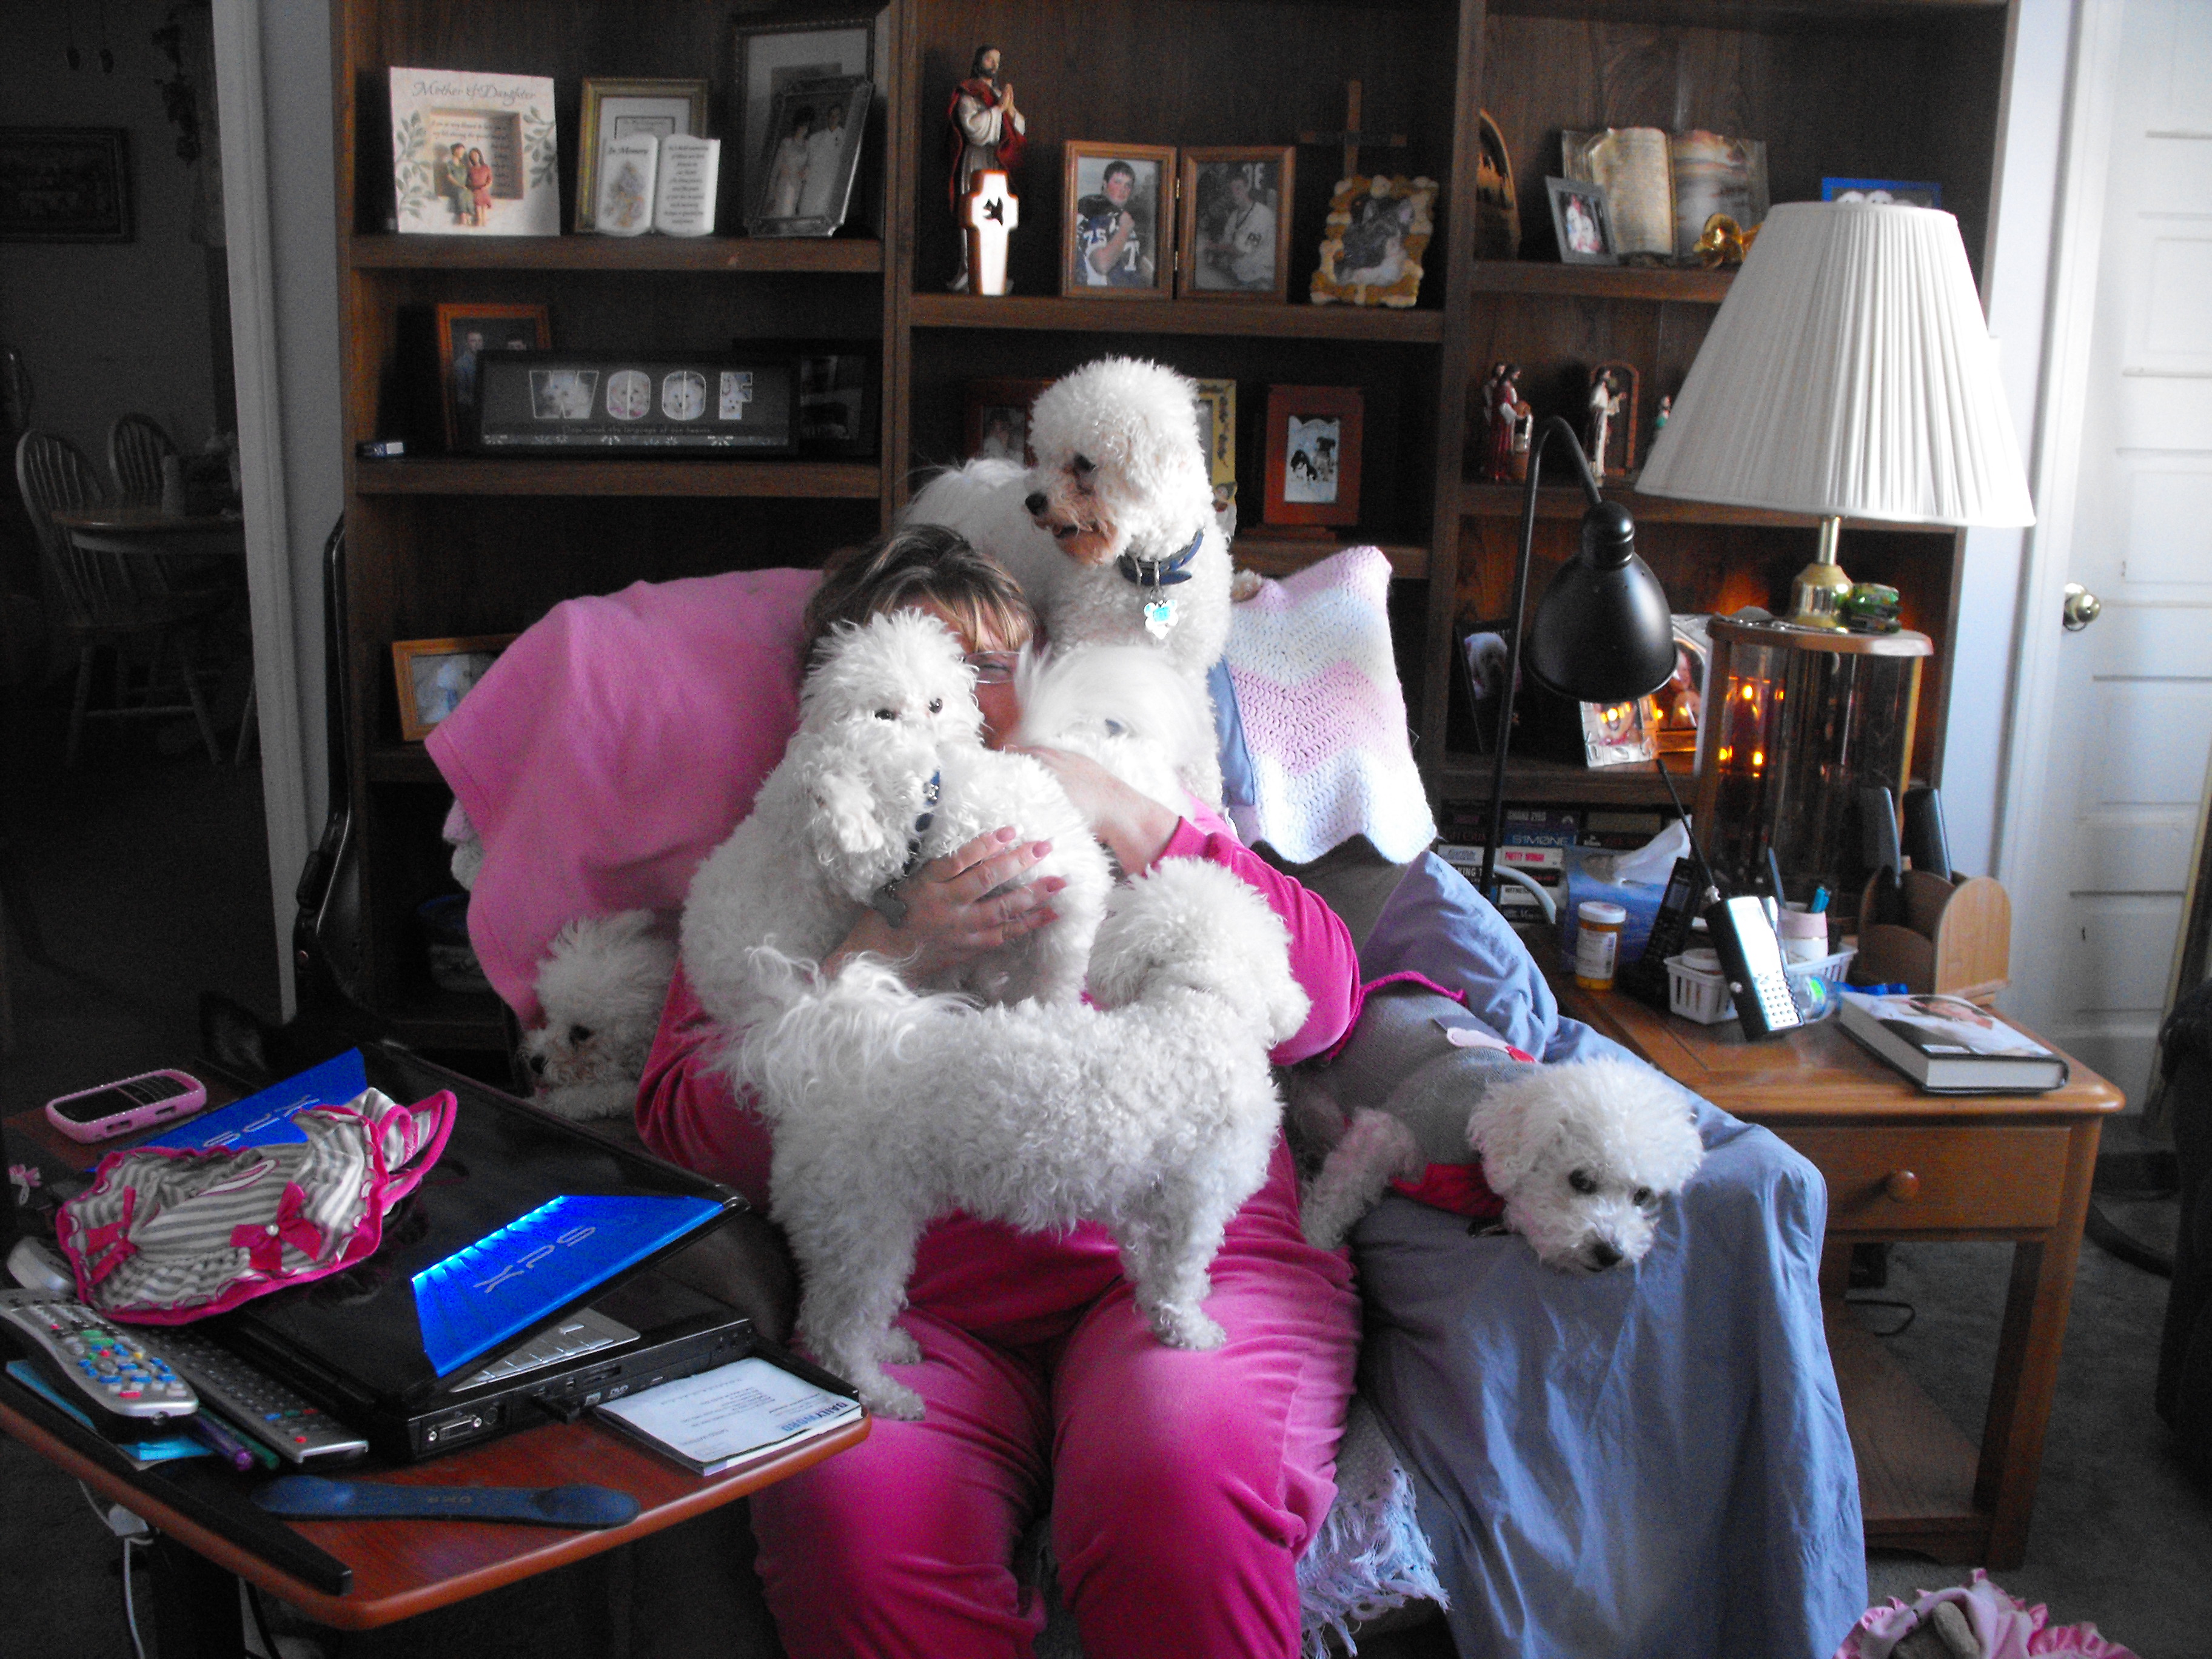 That's me covered in Bichons